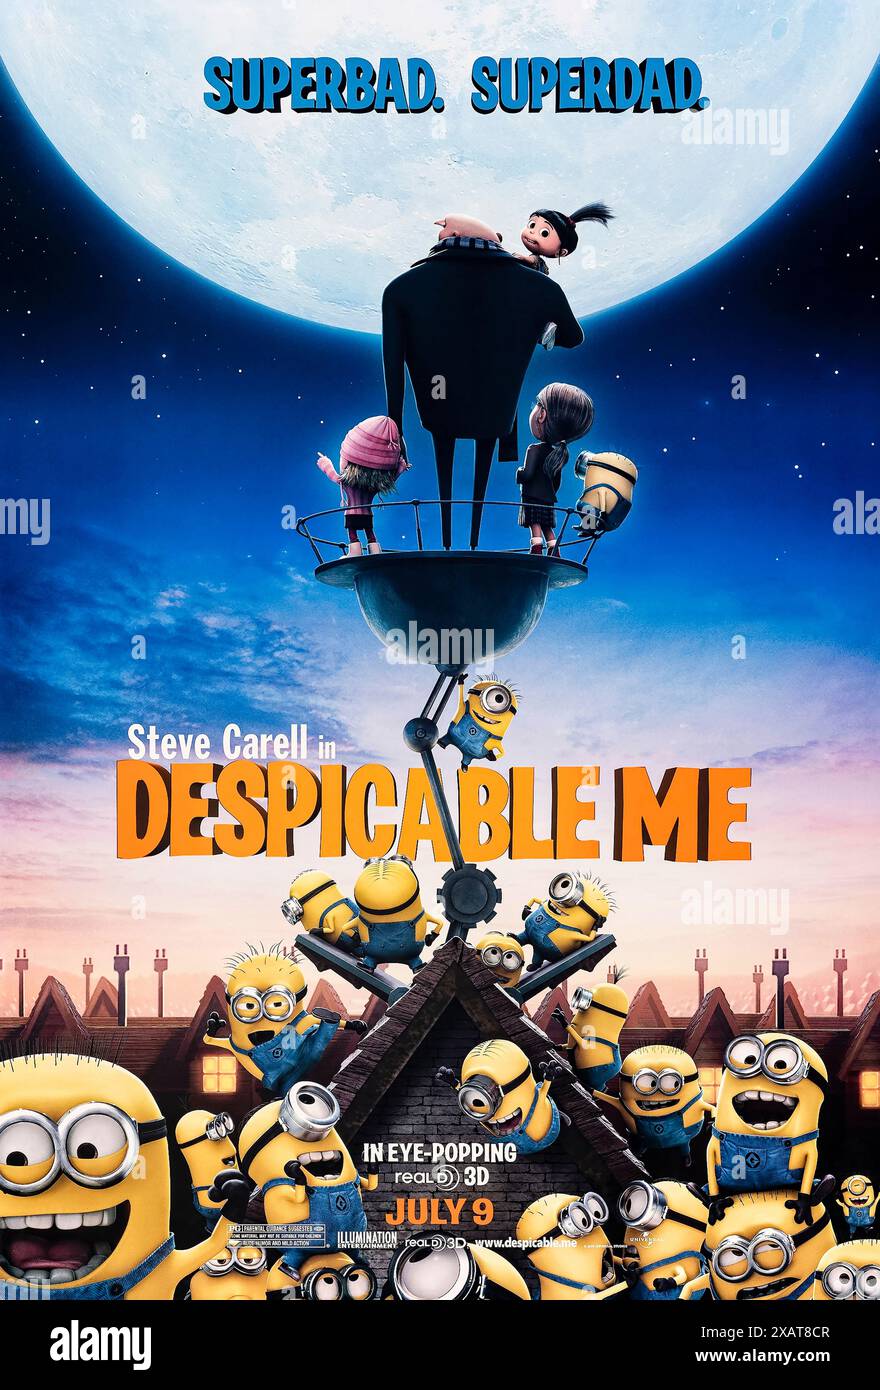 Despicable Me (2010) directed by Pierre Coffin and Chris Renaud and starring Steve Carell, Jason Segel and Russell Brand. Lily Pierce, haunted, seeks her estranged father, a disgraced history professor, to learn how to battle supernatural threats like knights fighting monsters, drawing from a bygone era of swords and armor. Photograph of an original 2010 US one sheet poster ***EDITORIAL USE ONLY***. Credit: BFA / Universal Pictures Stock Photo